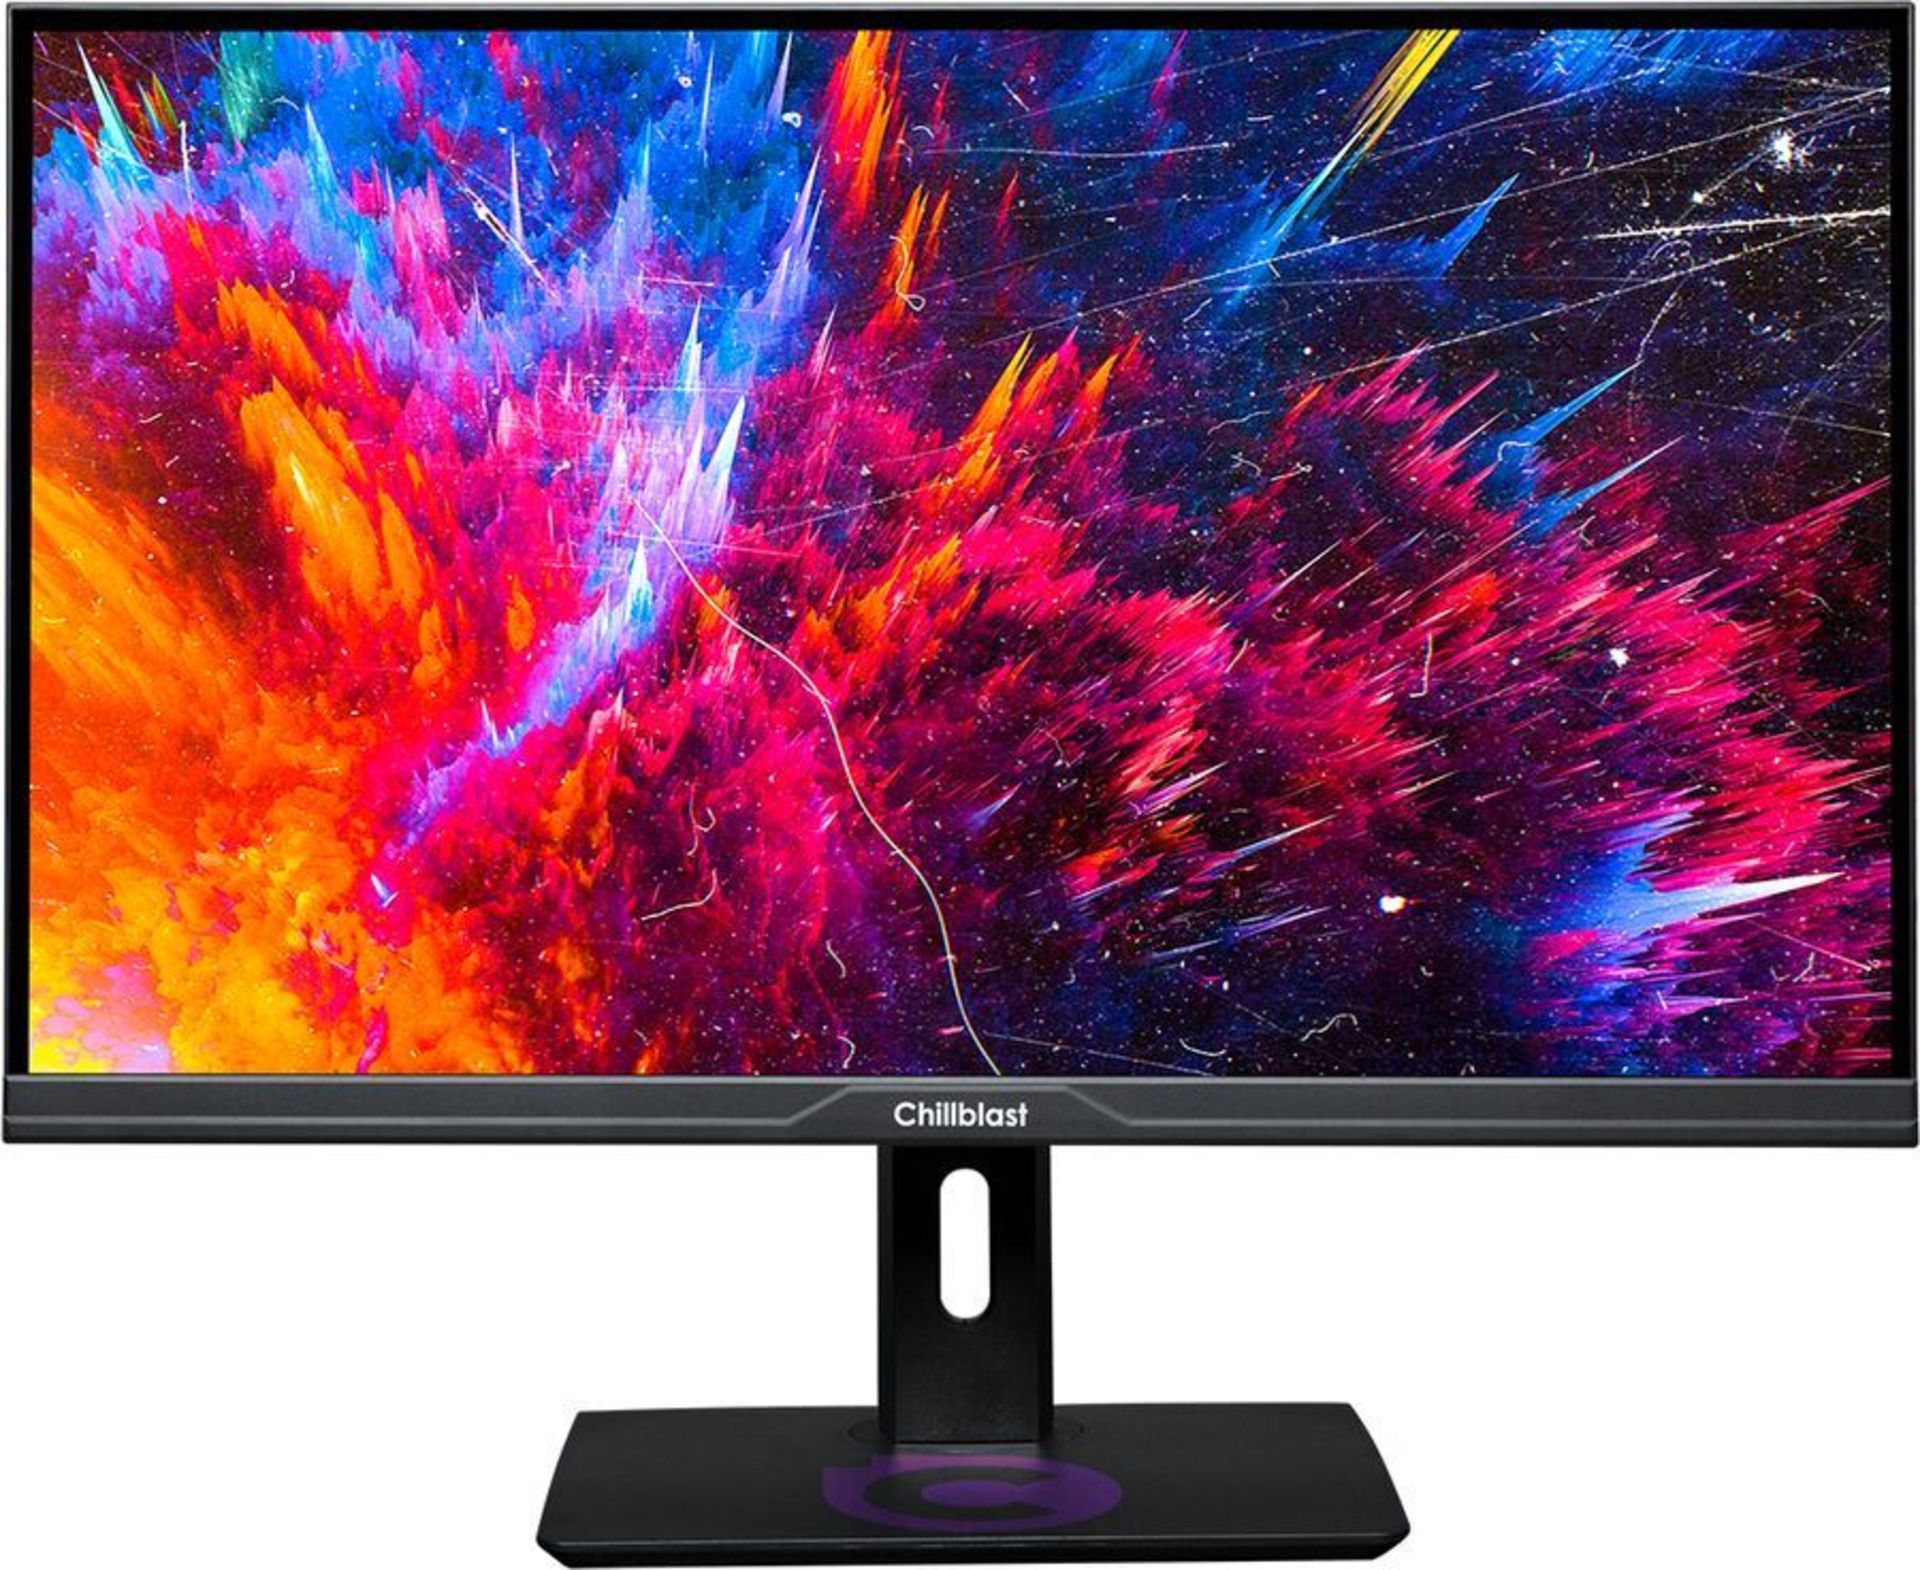 Chillblast 27QHD165V1 - 27" 2560x1440 IPS 165Hz Monitor. - P2. RRP £550.00. Going up a resolution is - Image 3 of 4